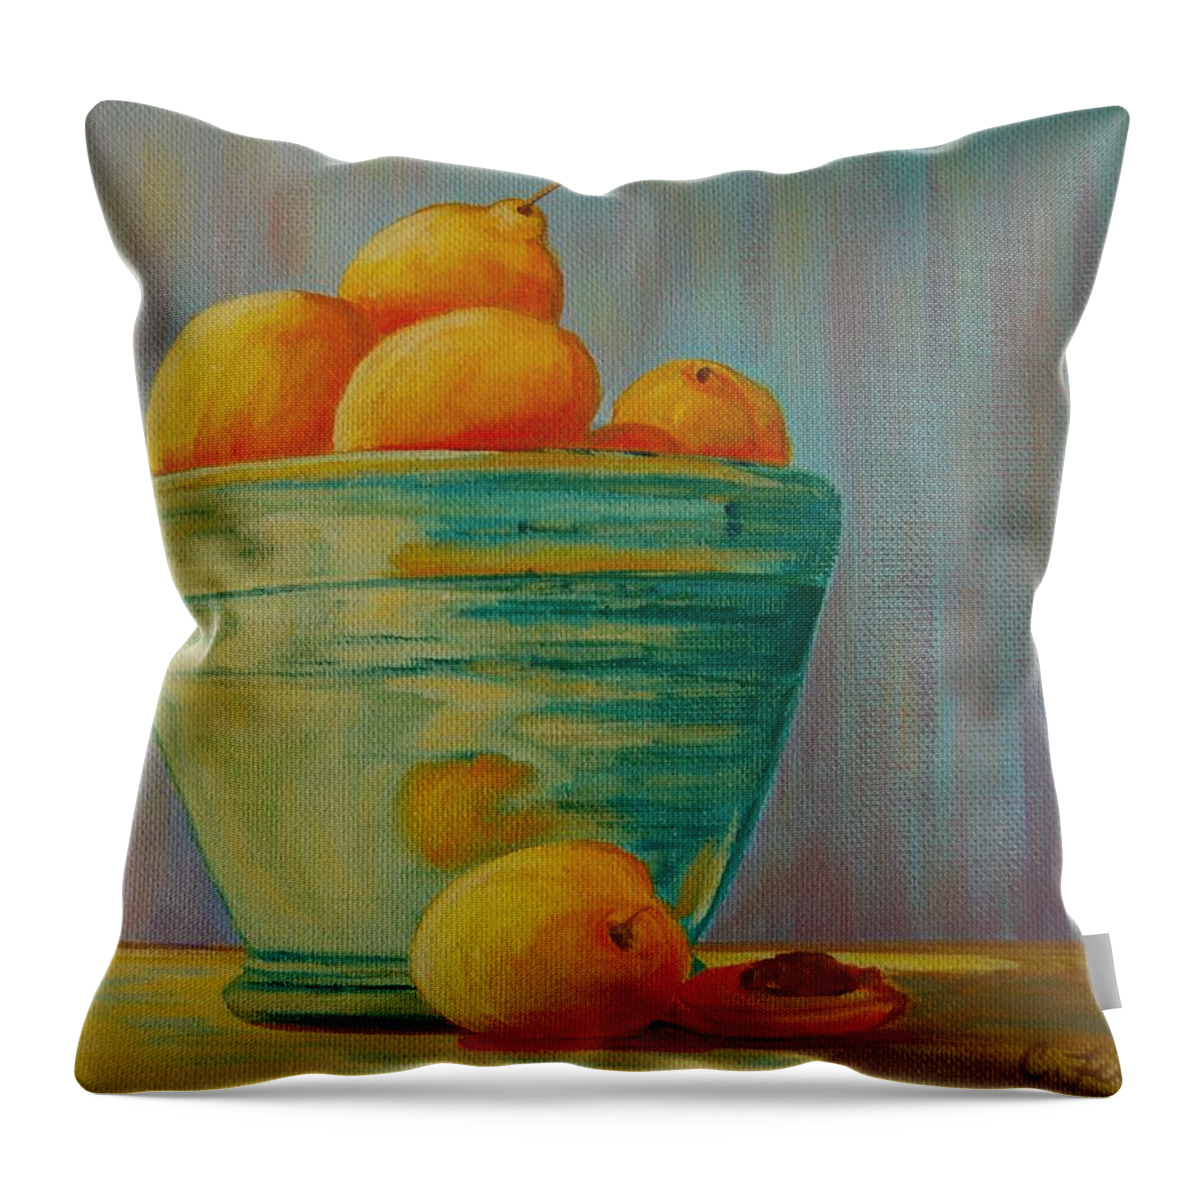 Still Life Throw Pillow featuring the painting Yellow Fruit Blue Bowl by Cheryl Fecht